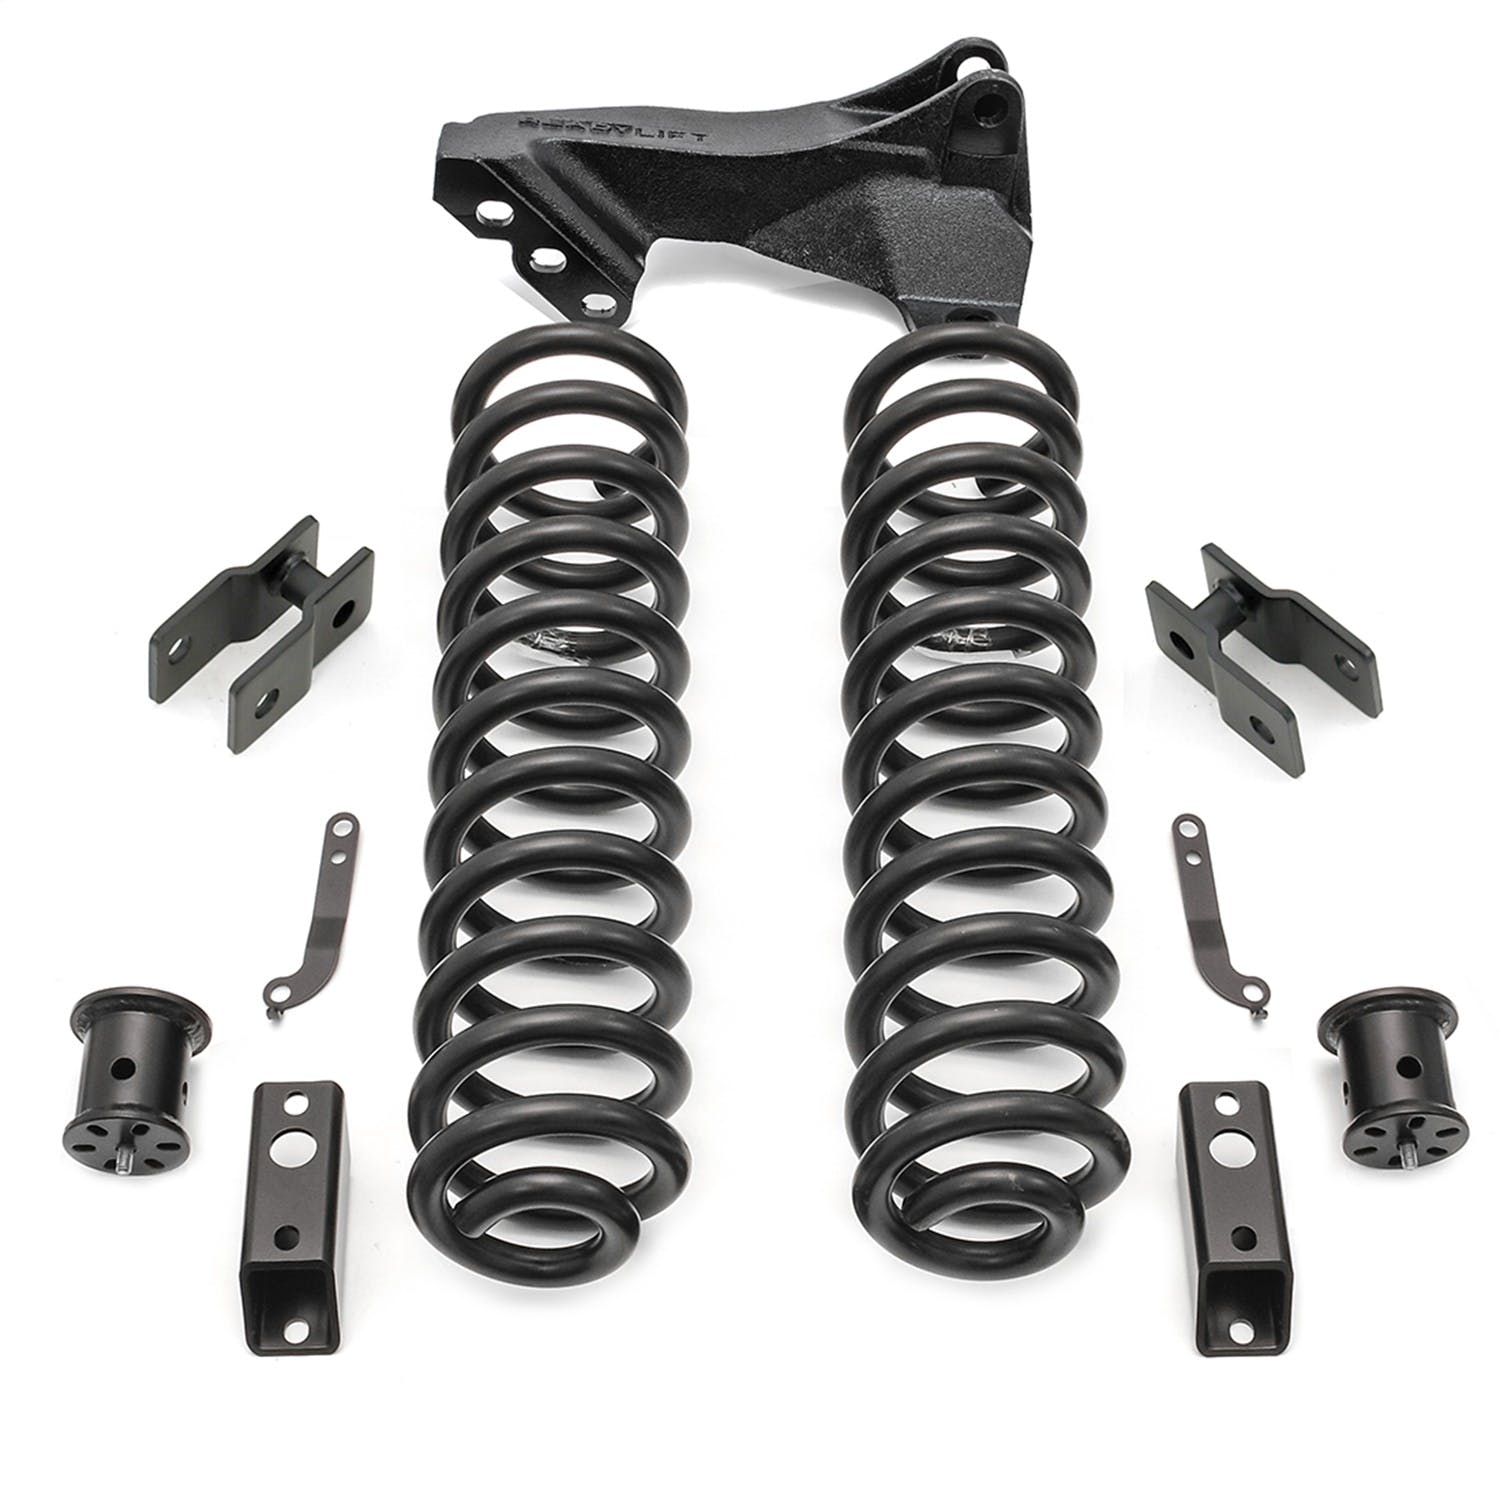 ReadyLIFT 46-2728 2.5" Coil Spring Front Lift Kit with Shock Extensions and Track Bar Bracket